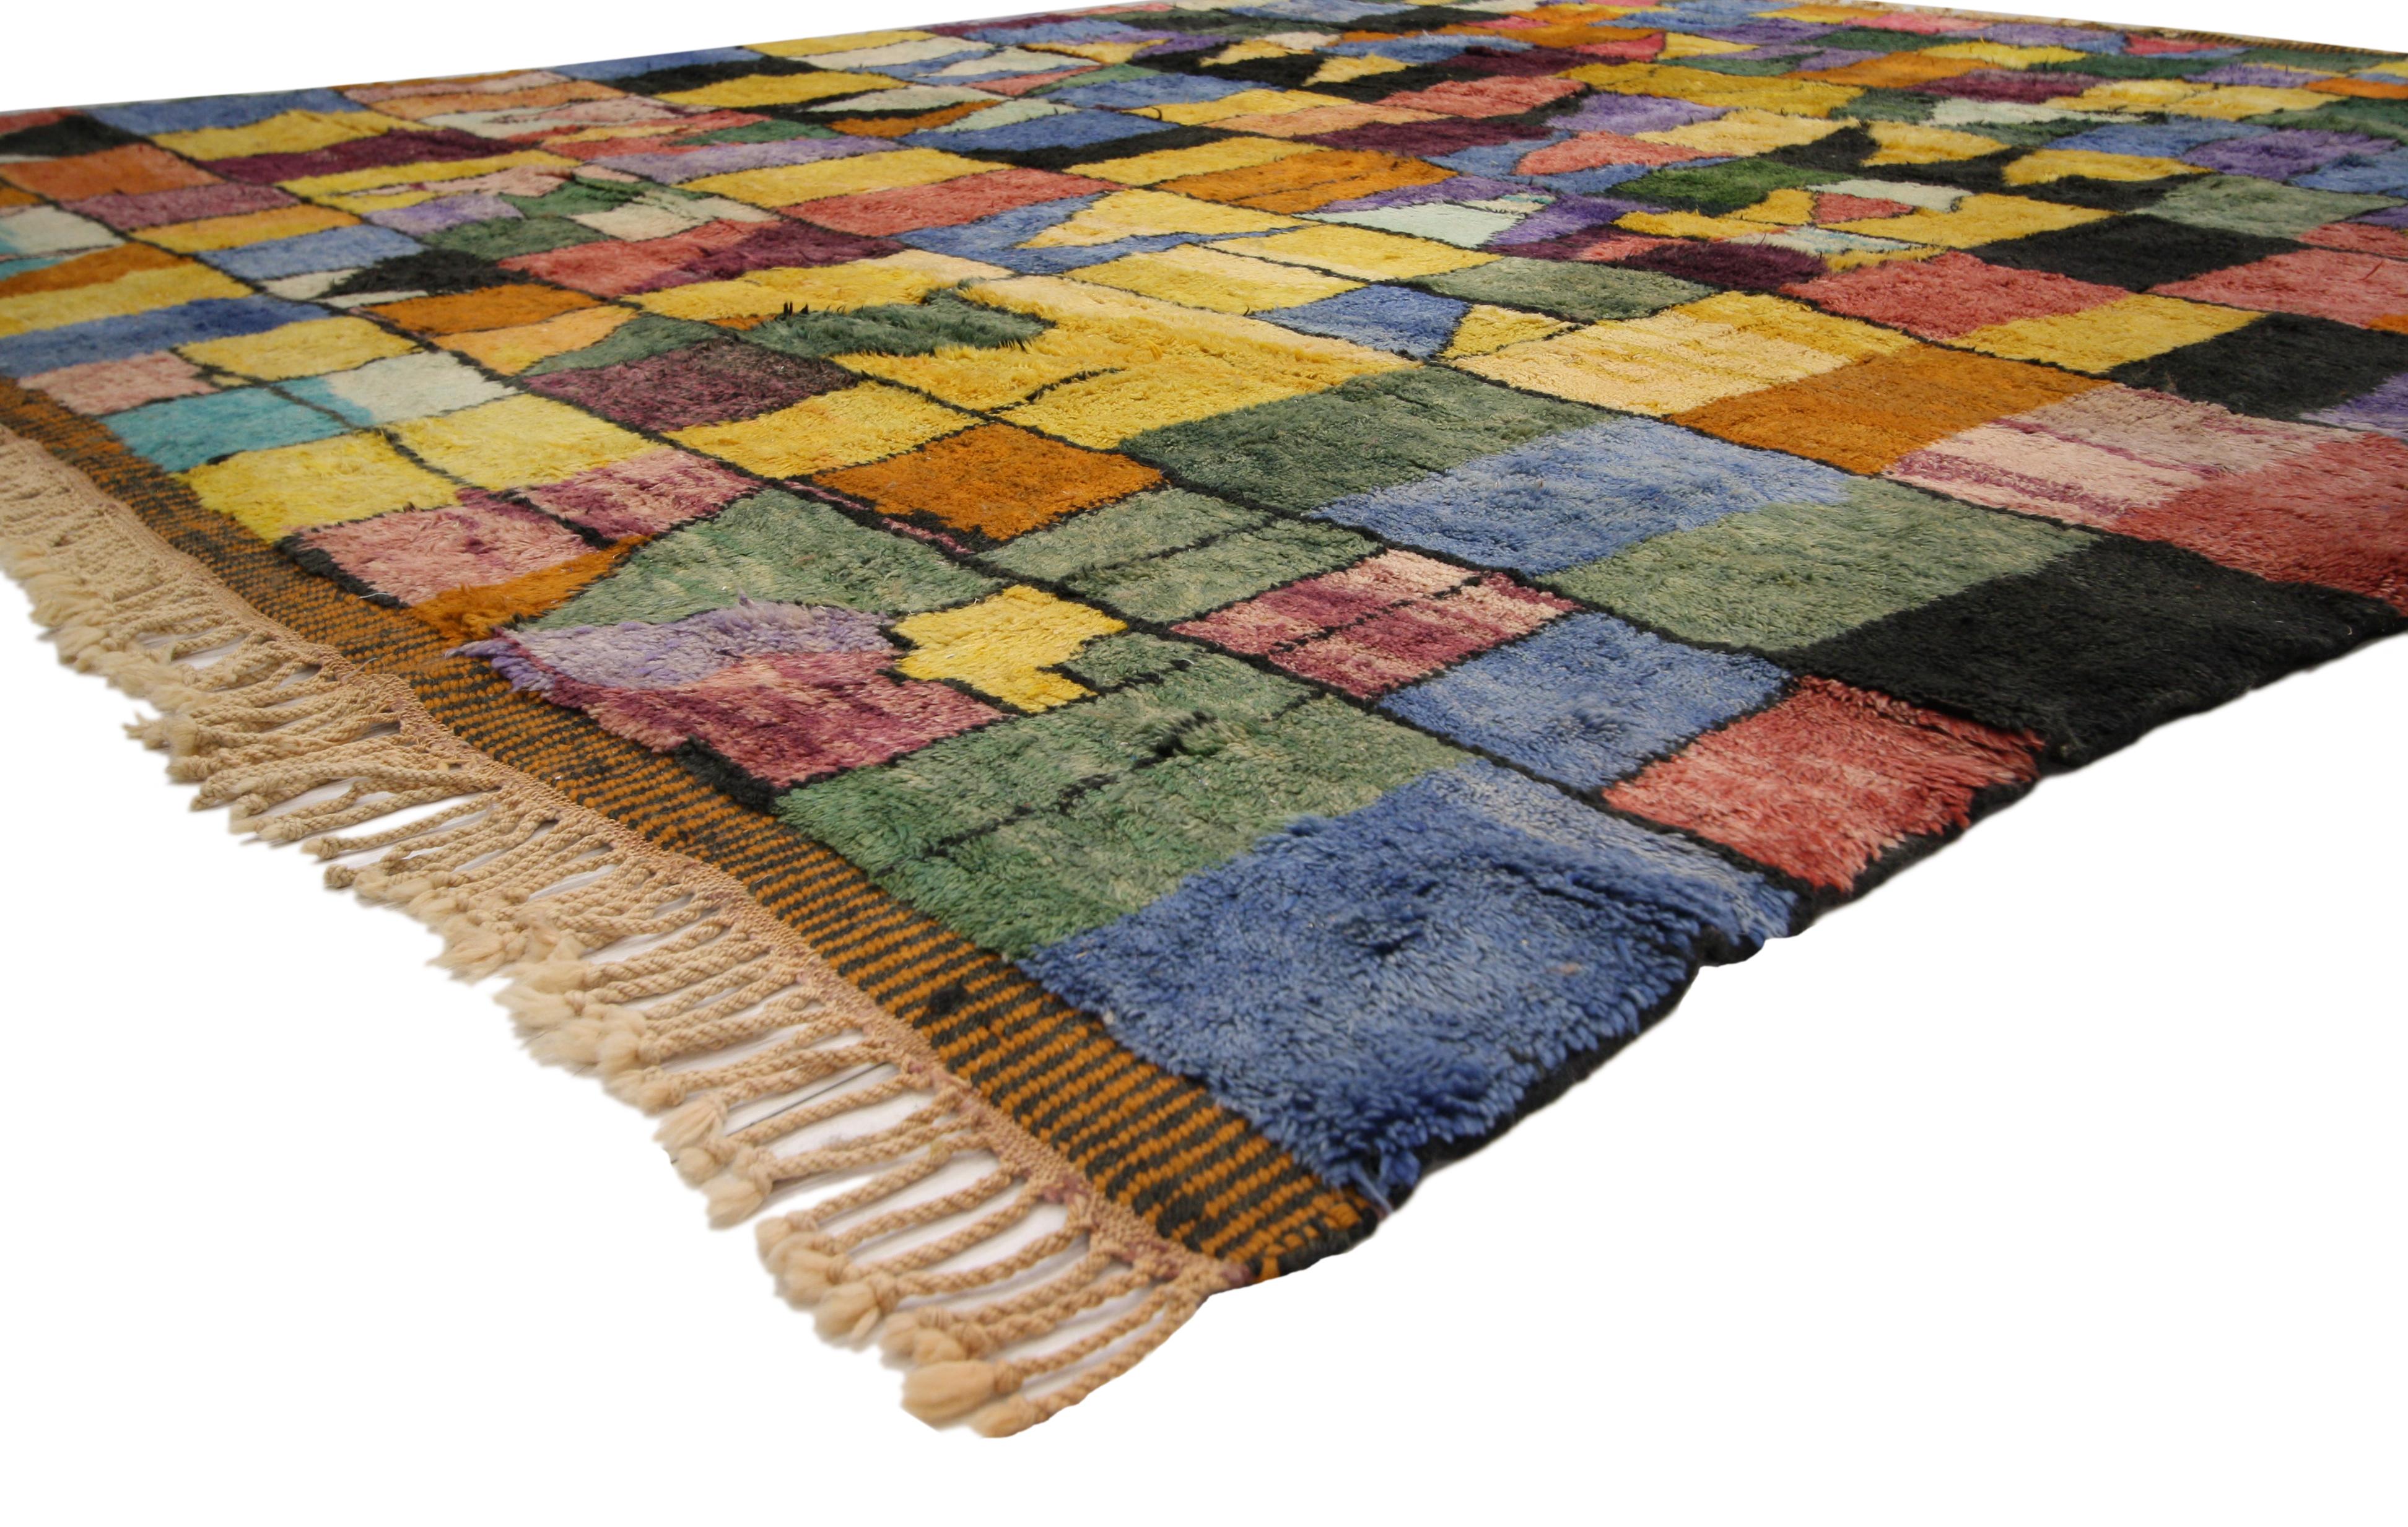 20718 Contemporary Bauhaus Moroccan Rug, Cubism and Postmodern Style after Paul Klee, 11'04 X 12'08. More than the asymmetrical beauty found in the geometric pattern, this hand-knotted wool contemporary Moroccan rug is Art You Can Walk On! This